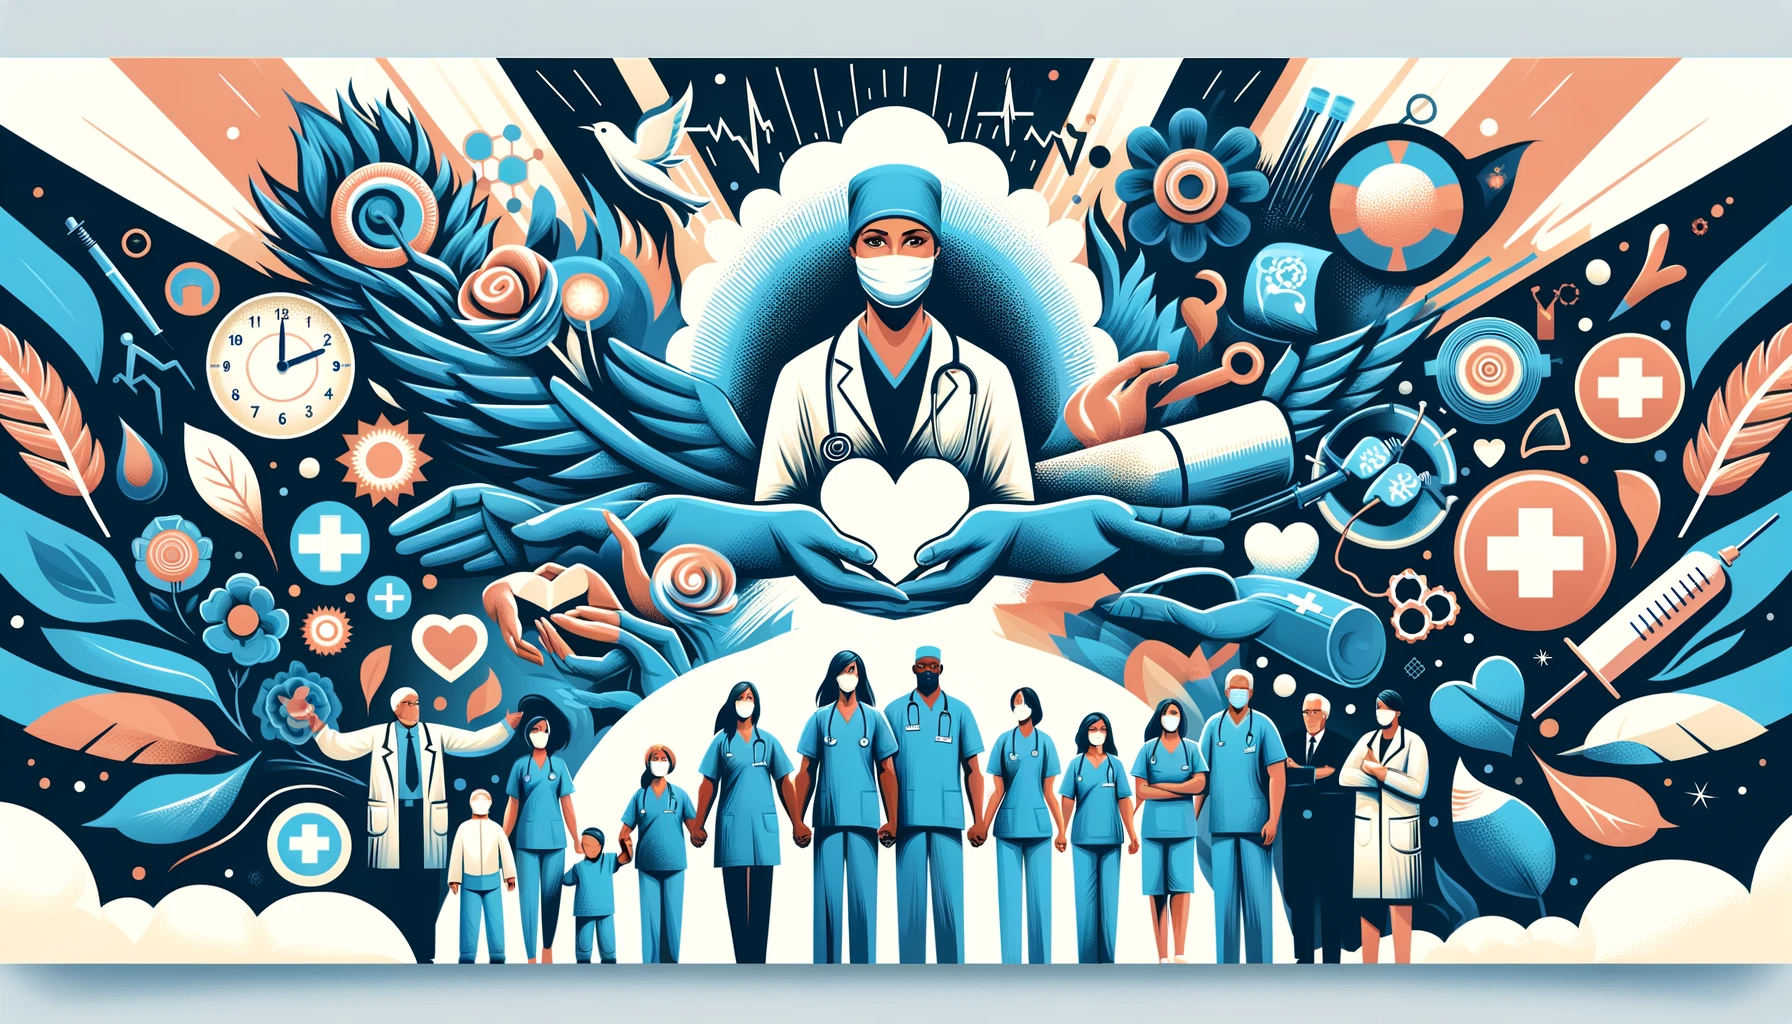 introduction banner of healthcare workers